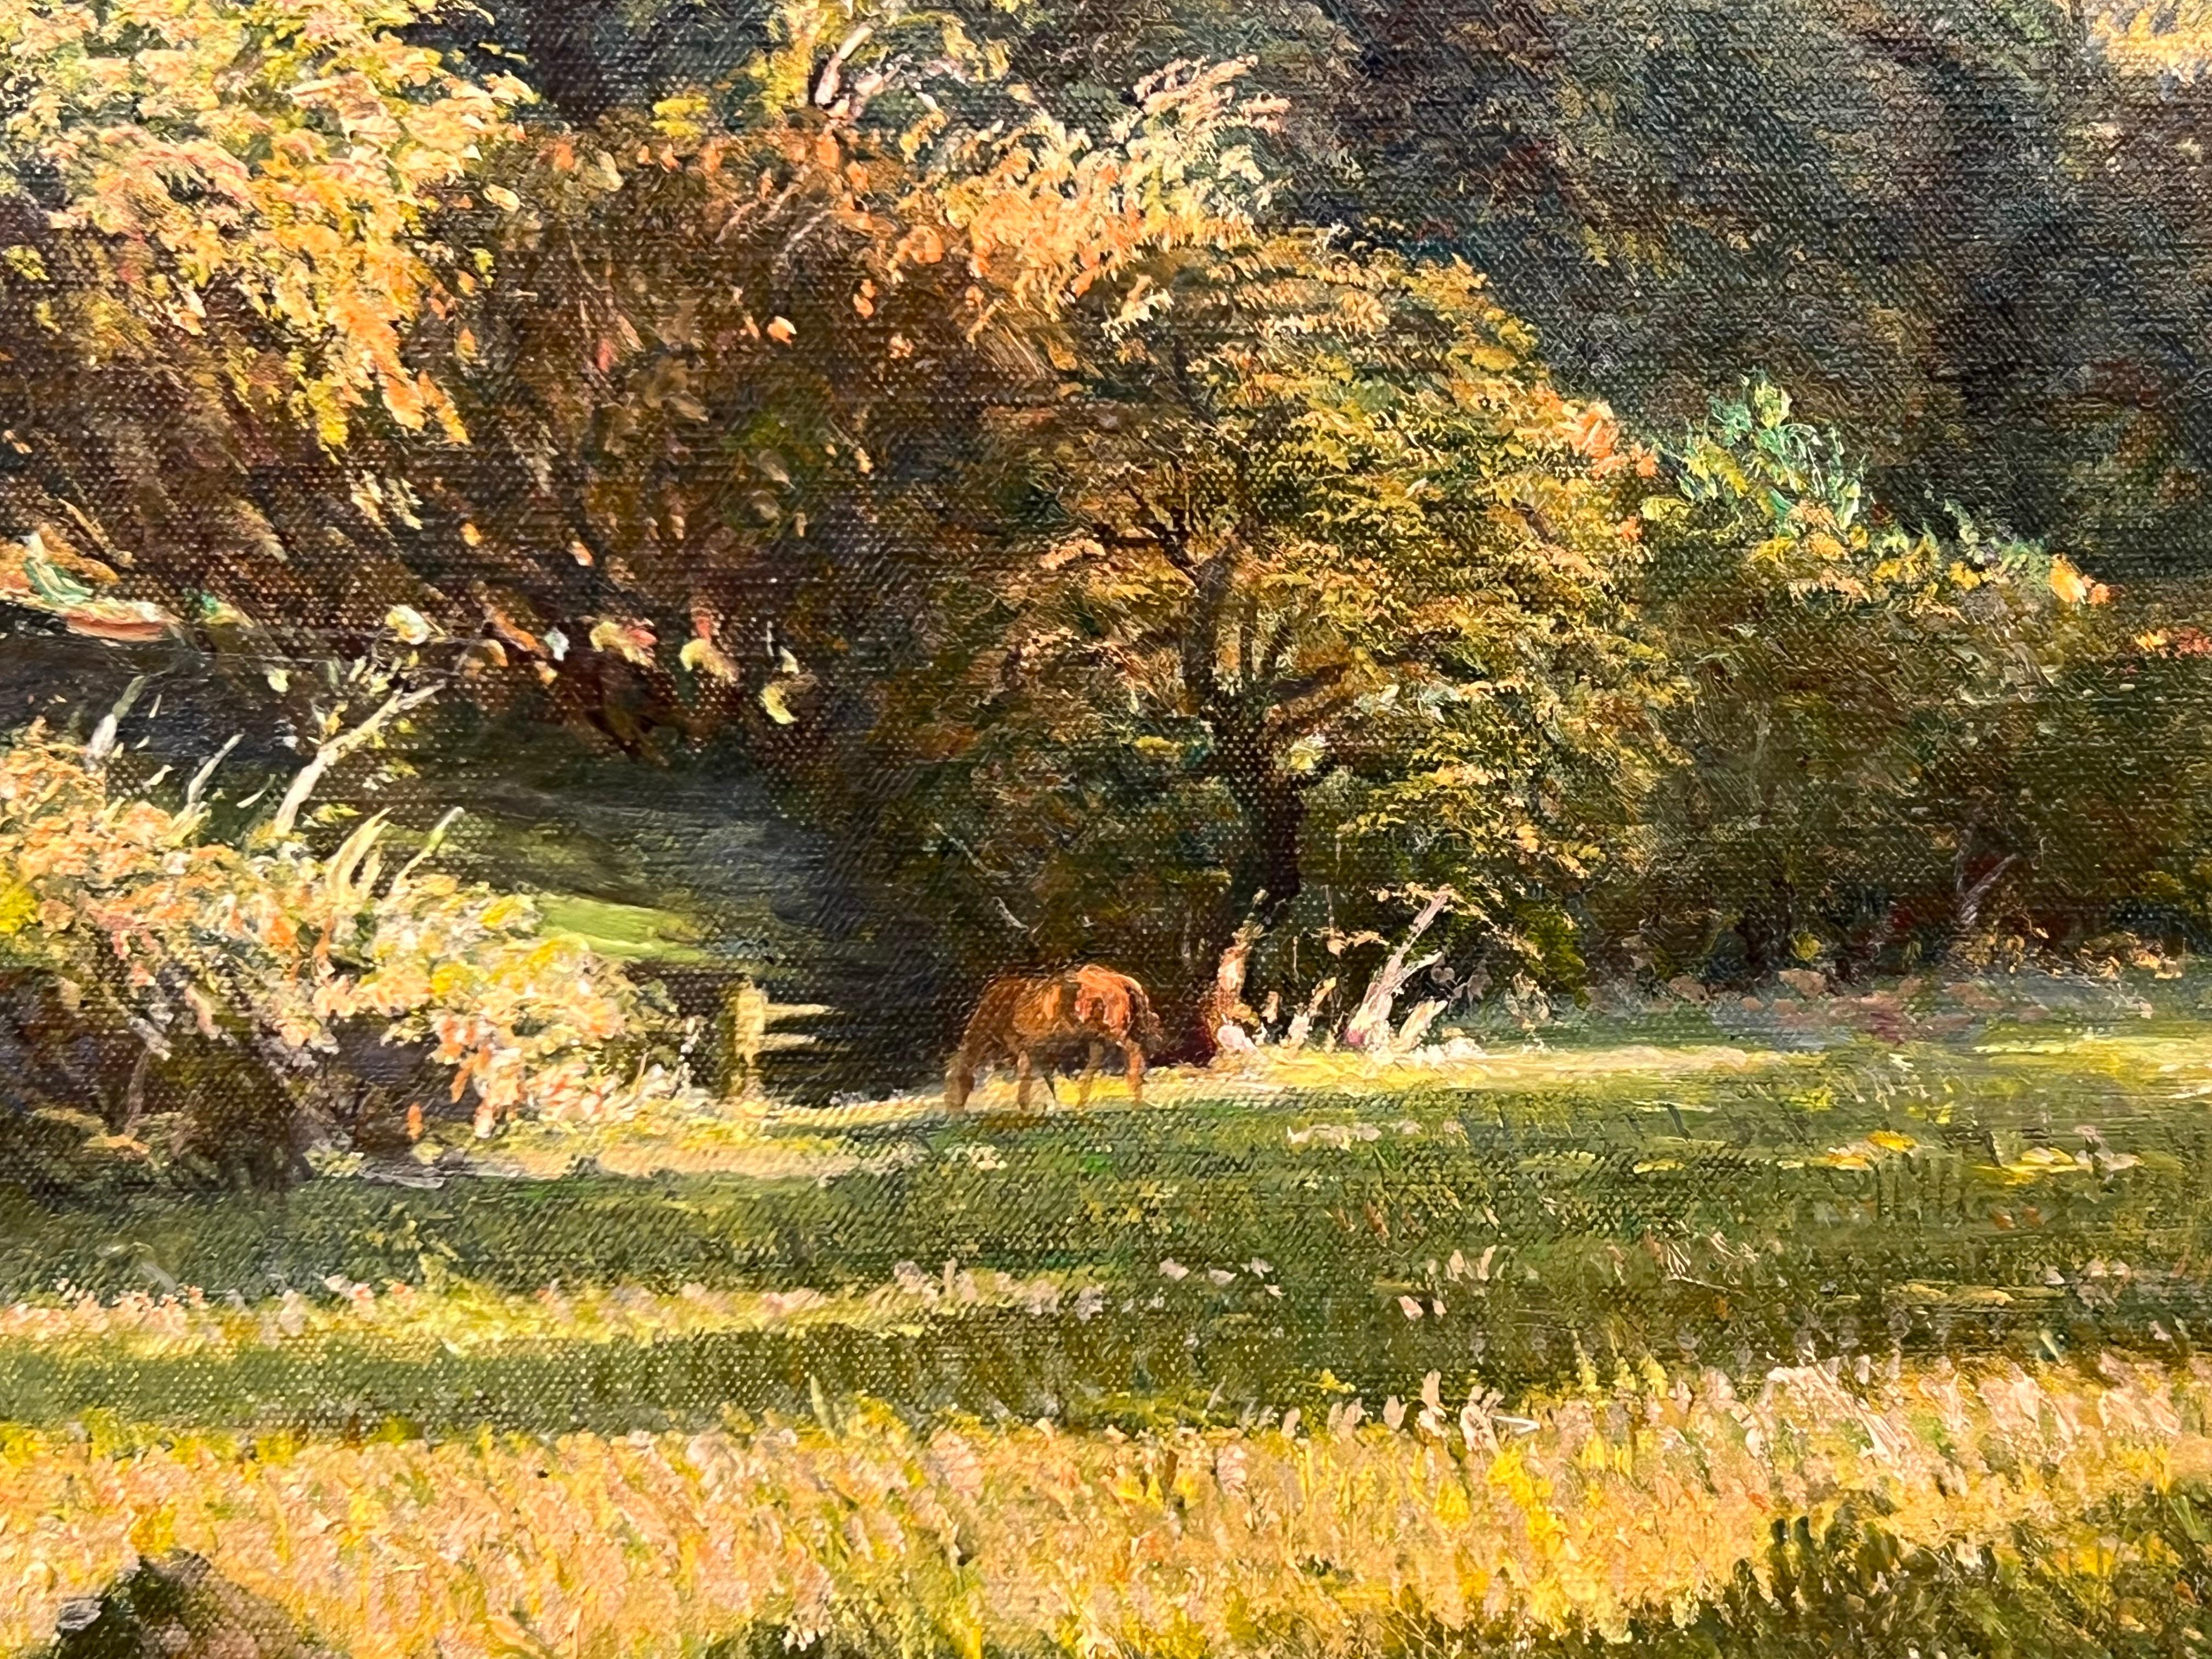 River Thames from Clivedon Woodland Garden London by 20th Century British Artist, Victor Elford (1911 - 2003). This painting is a beautiful depiction of horses in elevated woodland overlooking the River Thames, with figures working on the land and